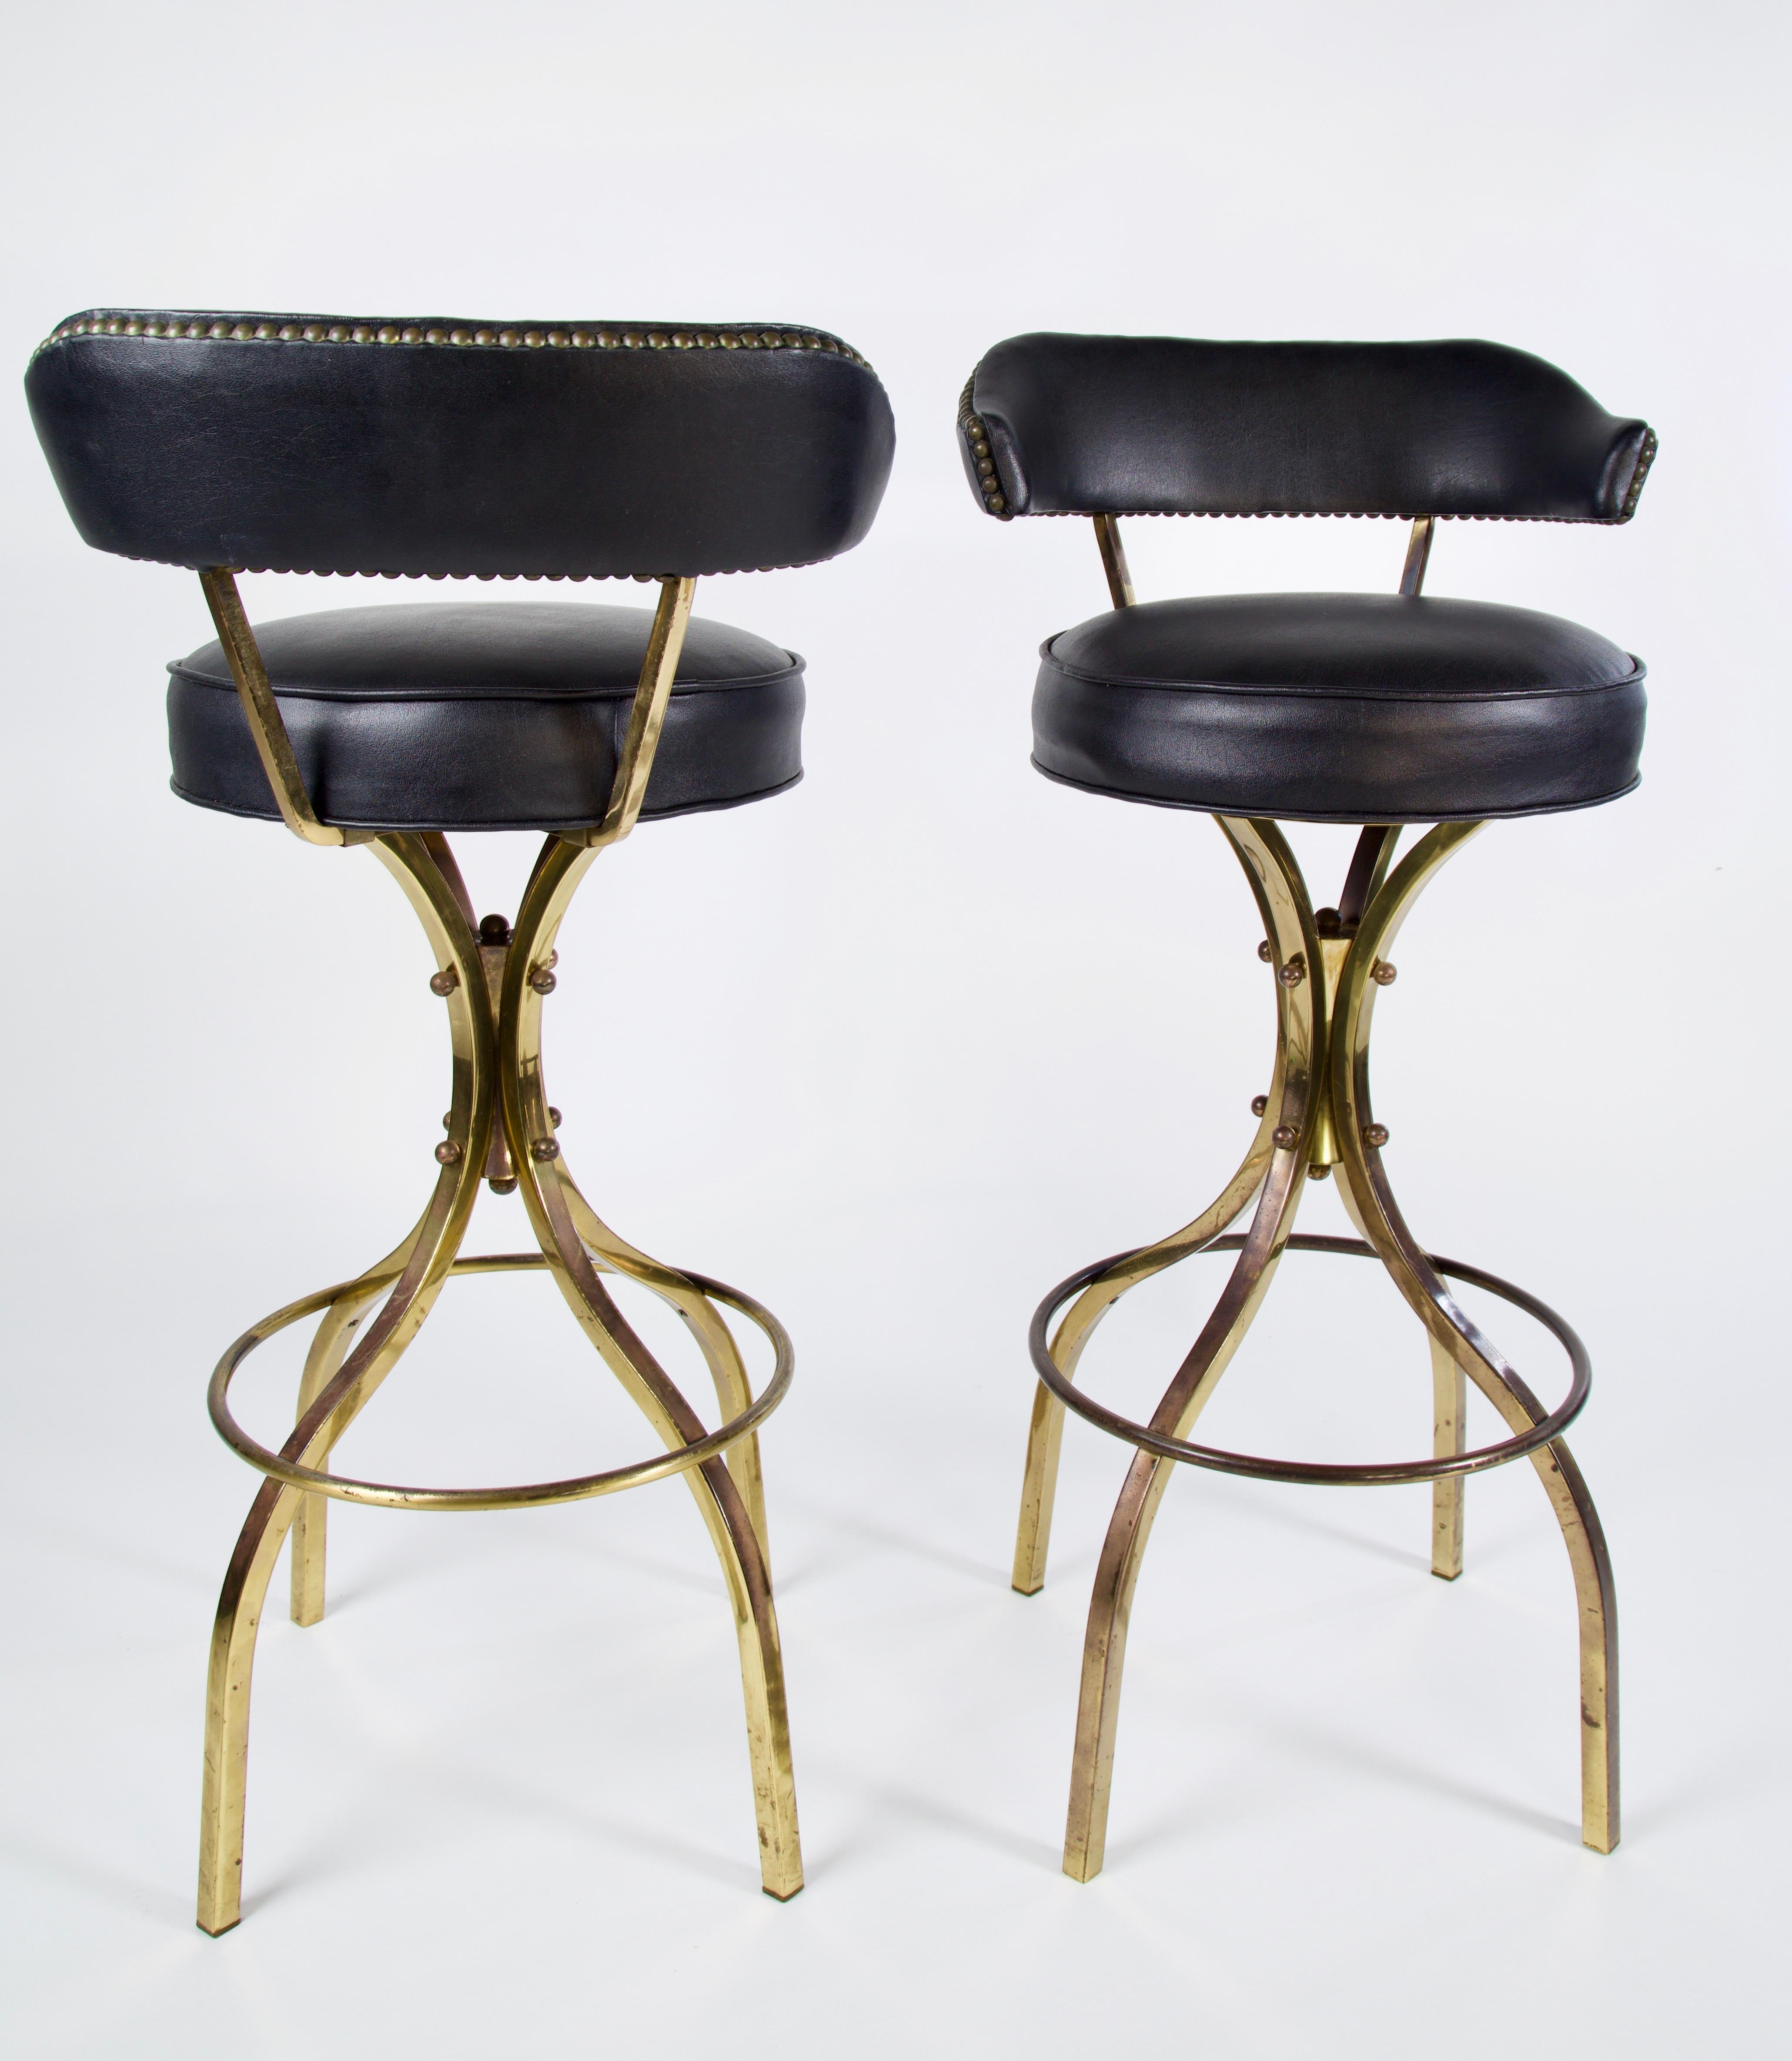 These sexy Charles Hollis Jones Sinatra bar stools are in original condition with a swivel seat upholstered in black Naugahyde and patinaed brass legs . Brass can be polished if desired. These are highly collected and sought after vintage Charles